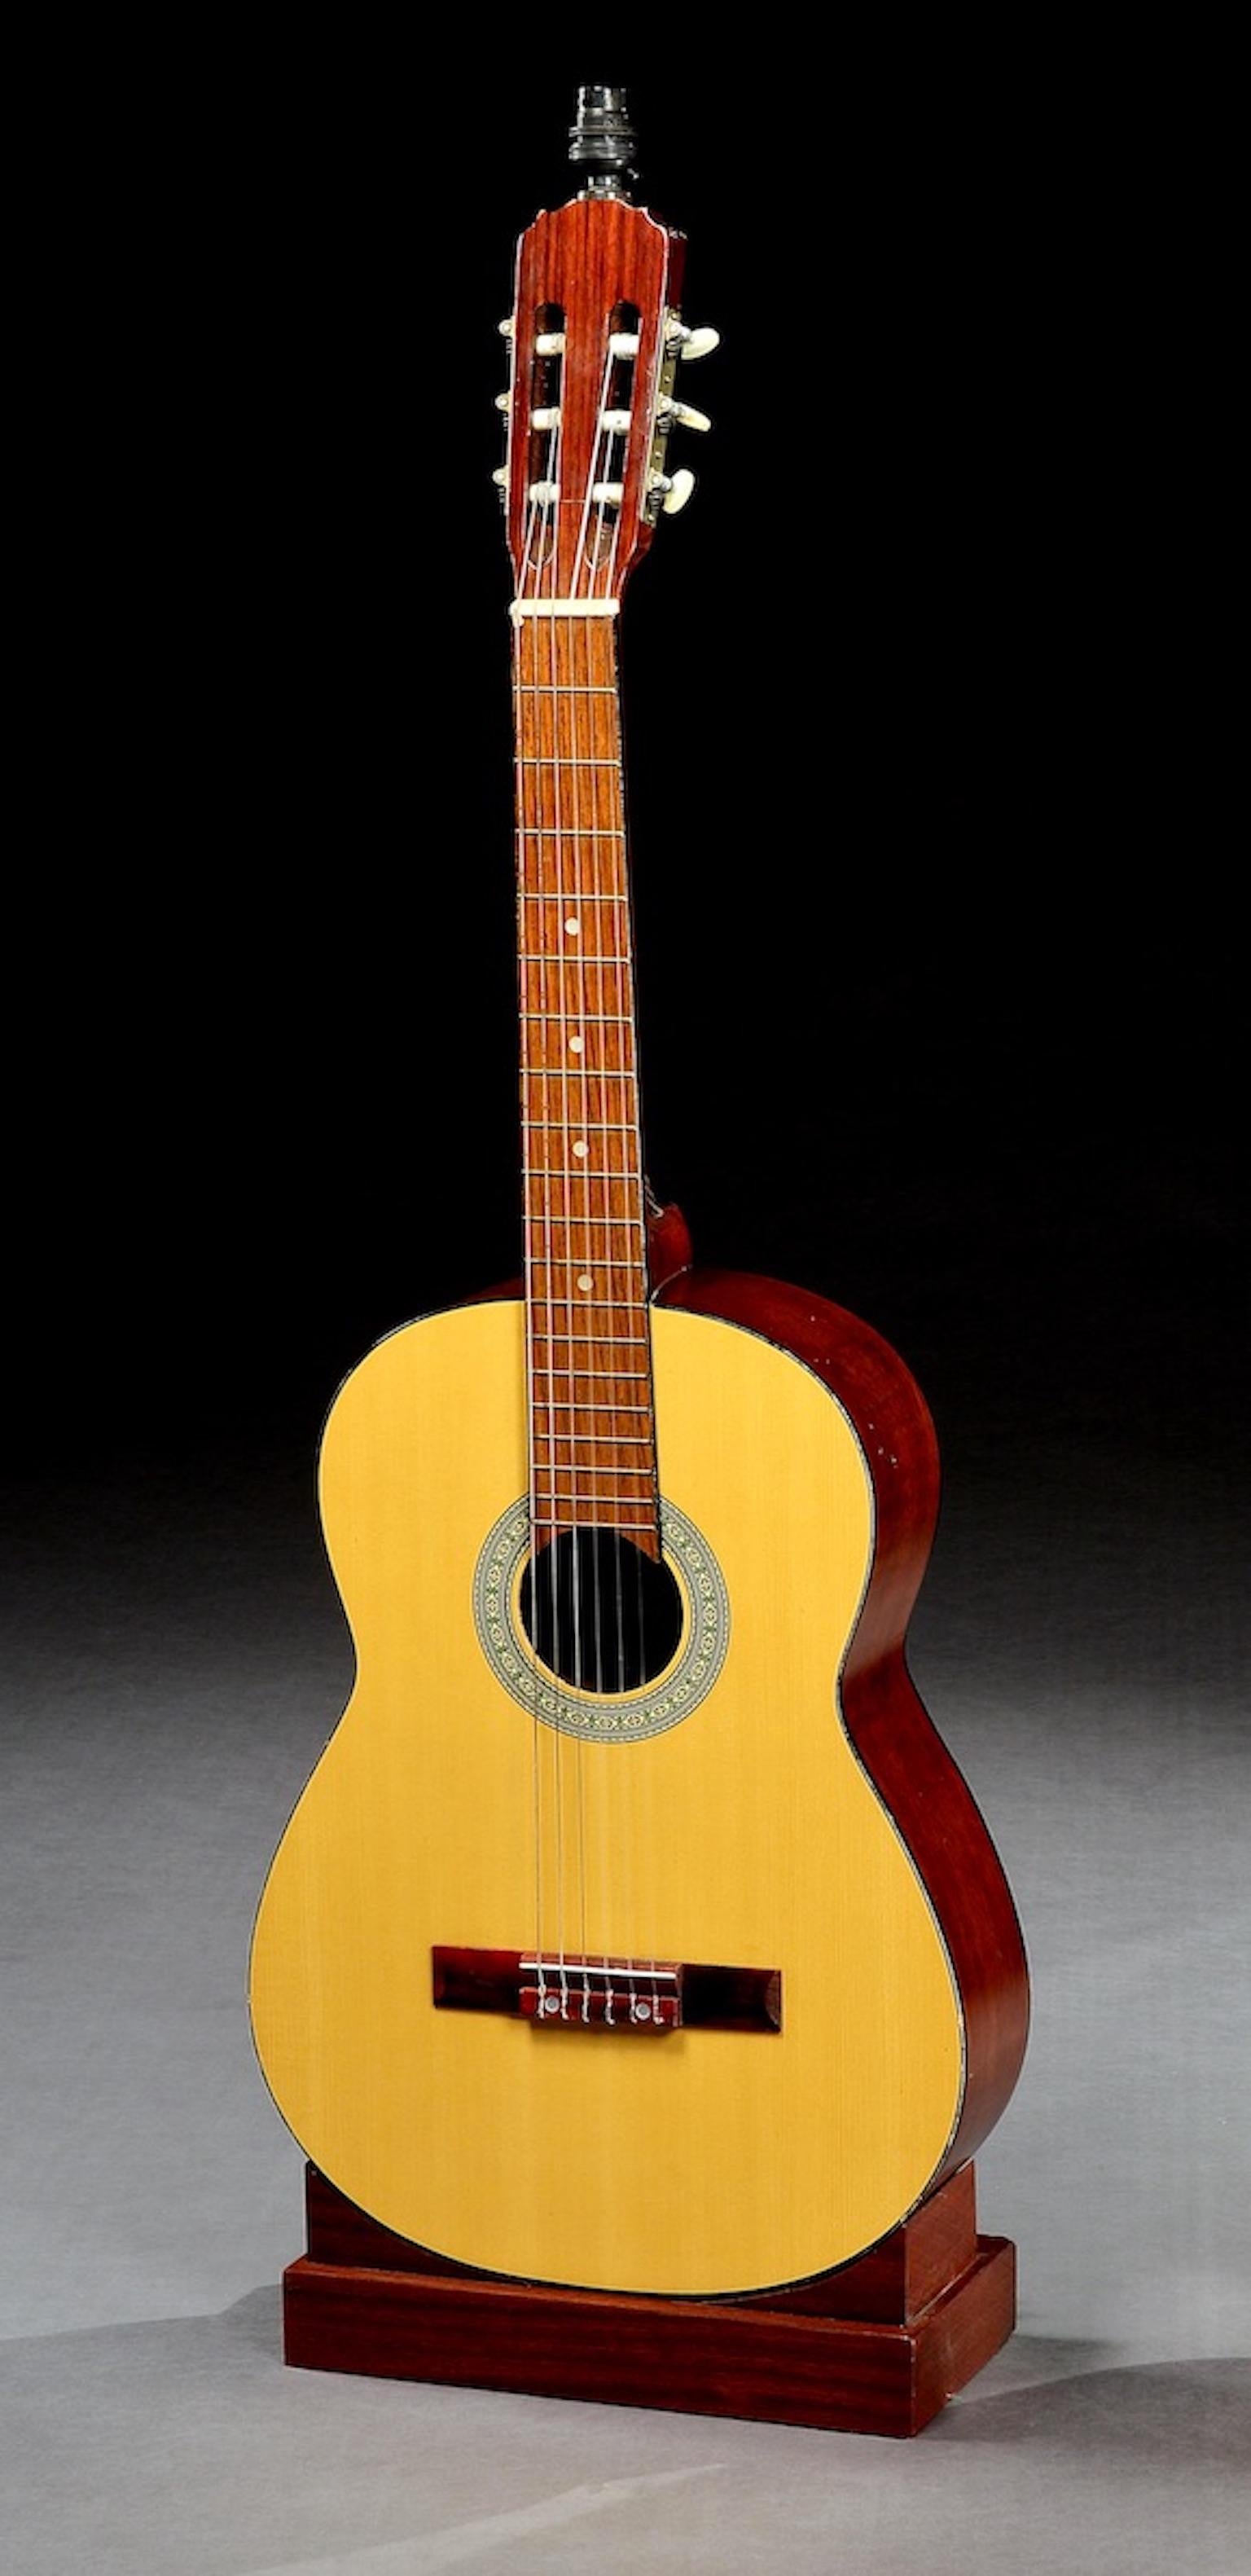 This full-size classical, acoustic guitar is in a natural, two-tone wooden finish and has a vibrant, exciting tone.
 
 Linden laminate body, back, sides and neck. The body with Classic rosette decoration. Binding black front. Bridge maple. Machine